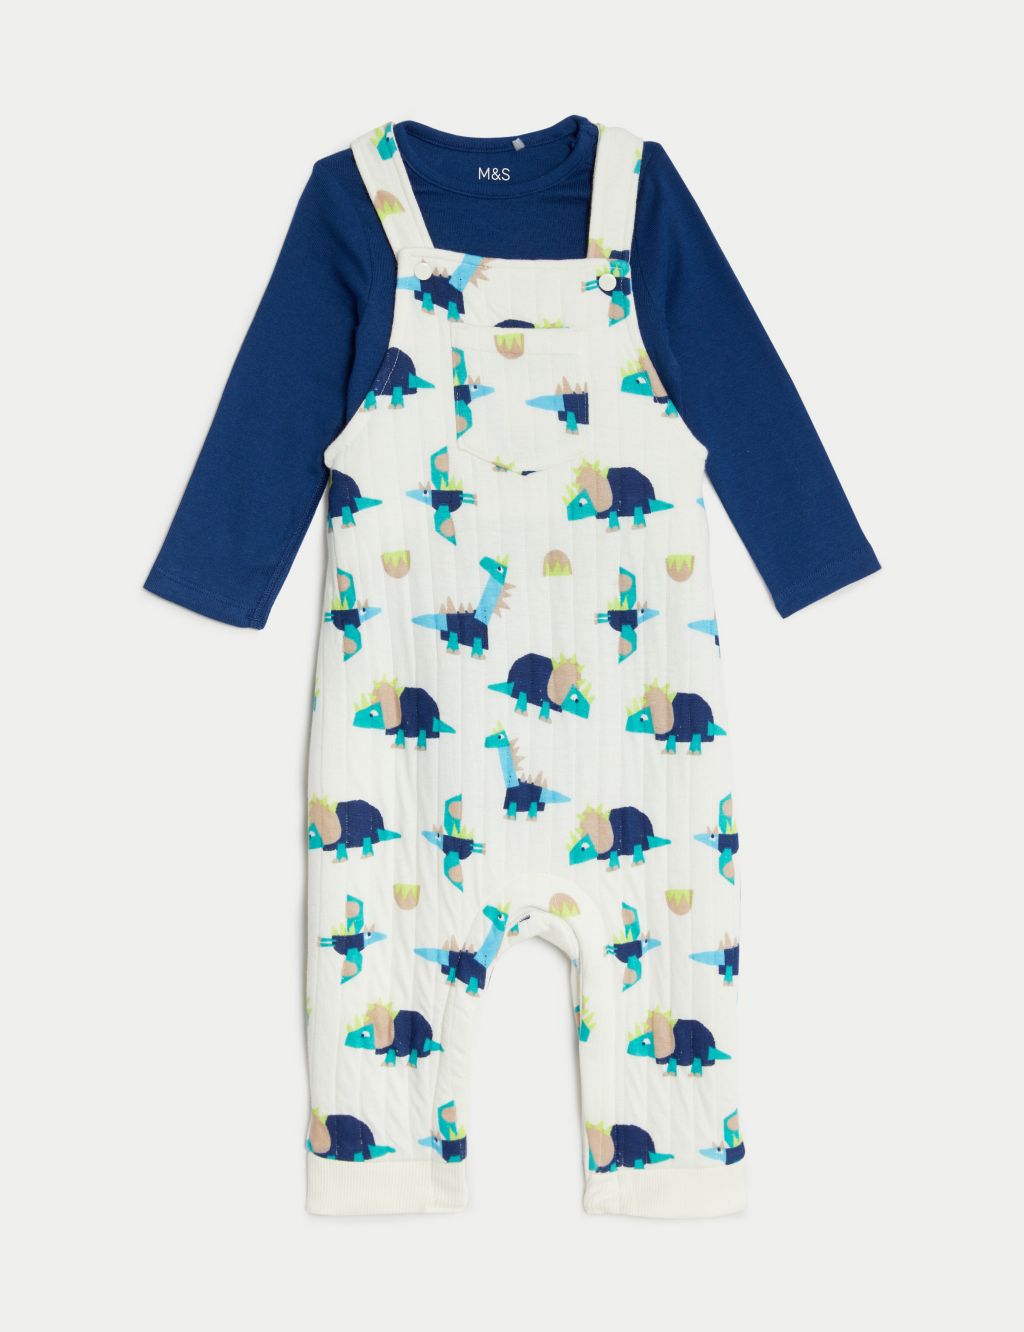 2pc Cotton Rich Dinosaur Outfit (0-3 Yrs) image 2